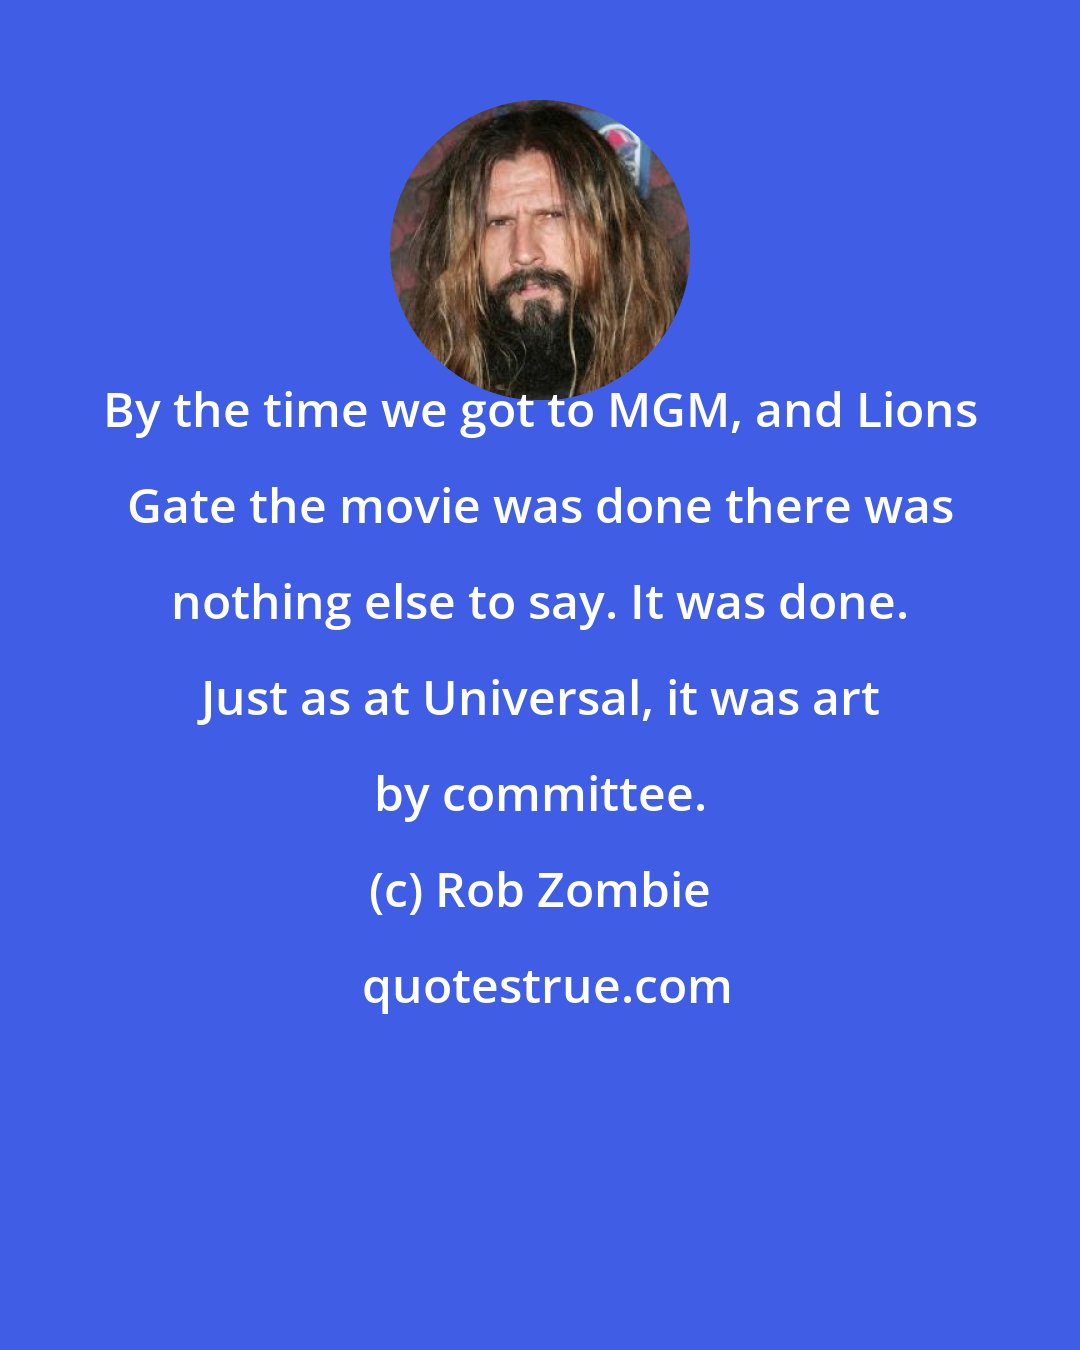 Rob Zombie: By the time we got to MGM, and Lions Gate the movie was done there was nothing else to say. It was done. Just as at Universal, it was art by committee.